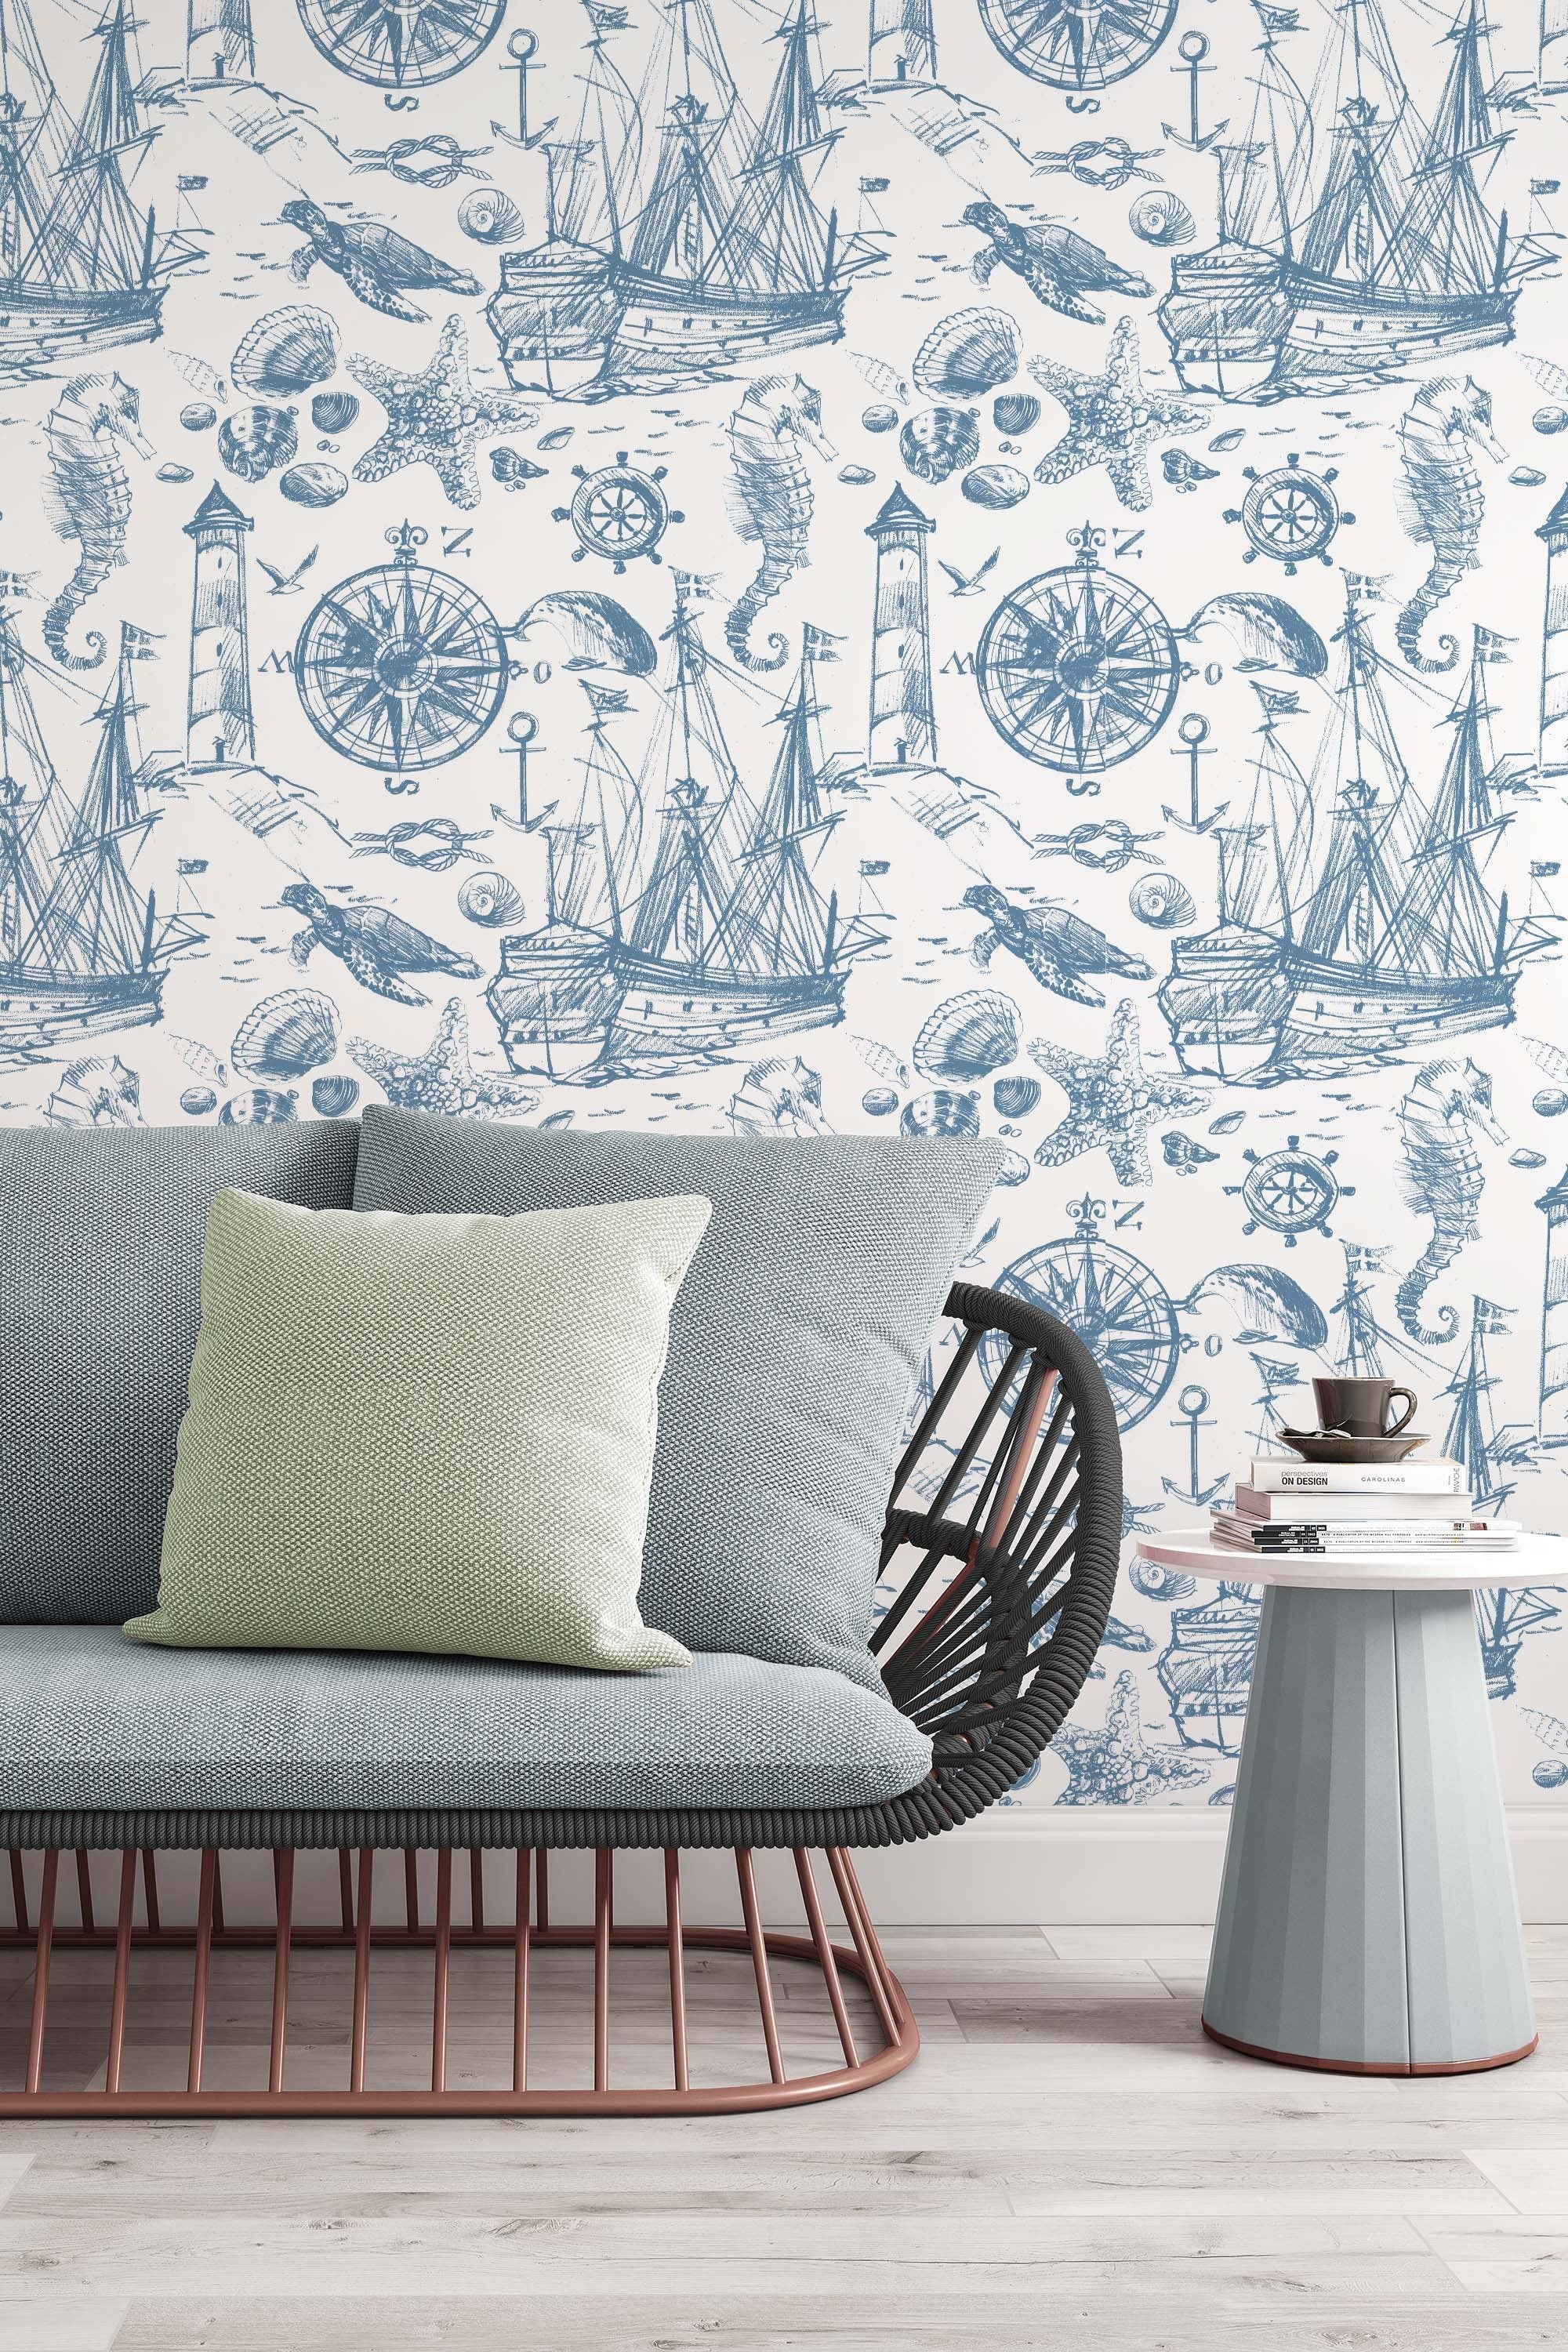 Buy 16 Feet Colorful Nautical 3 180 Gsm Wallpaper Roll at 24 OFF by Space  Of Joy  Pepperfry